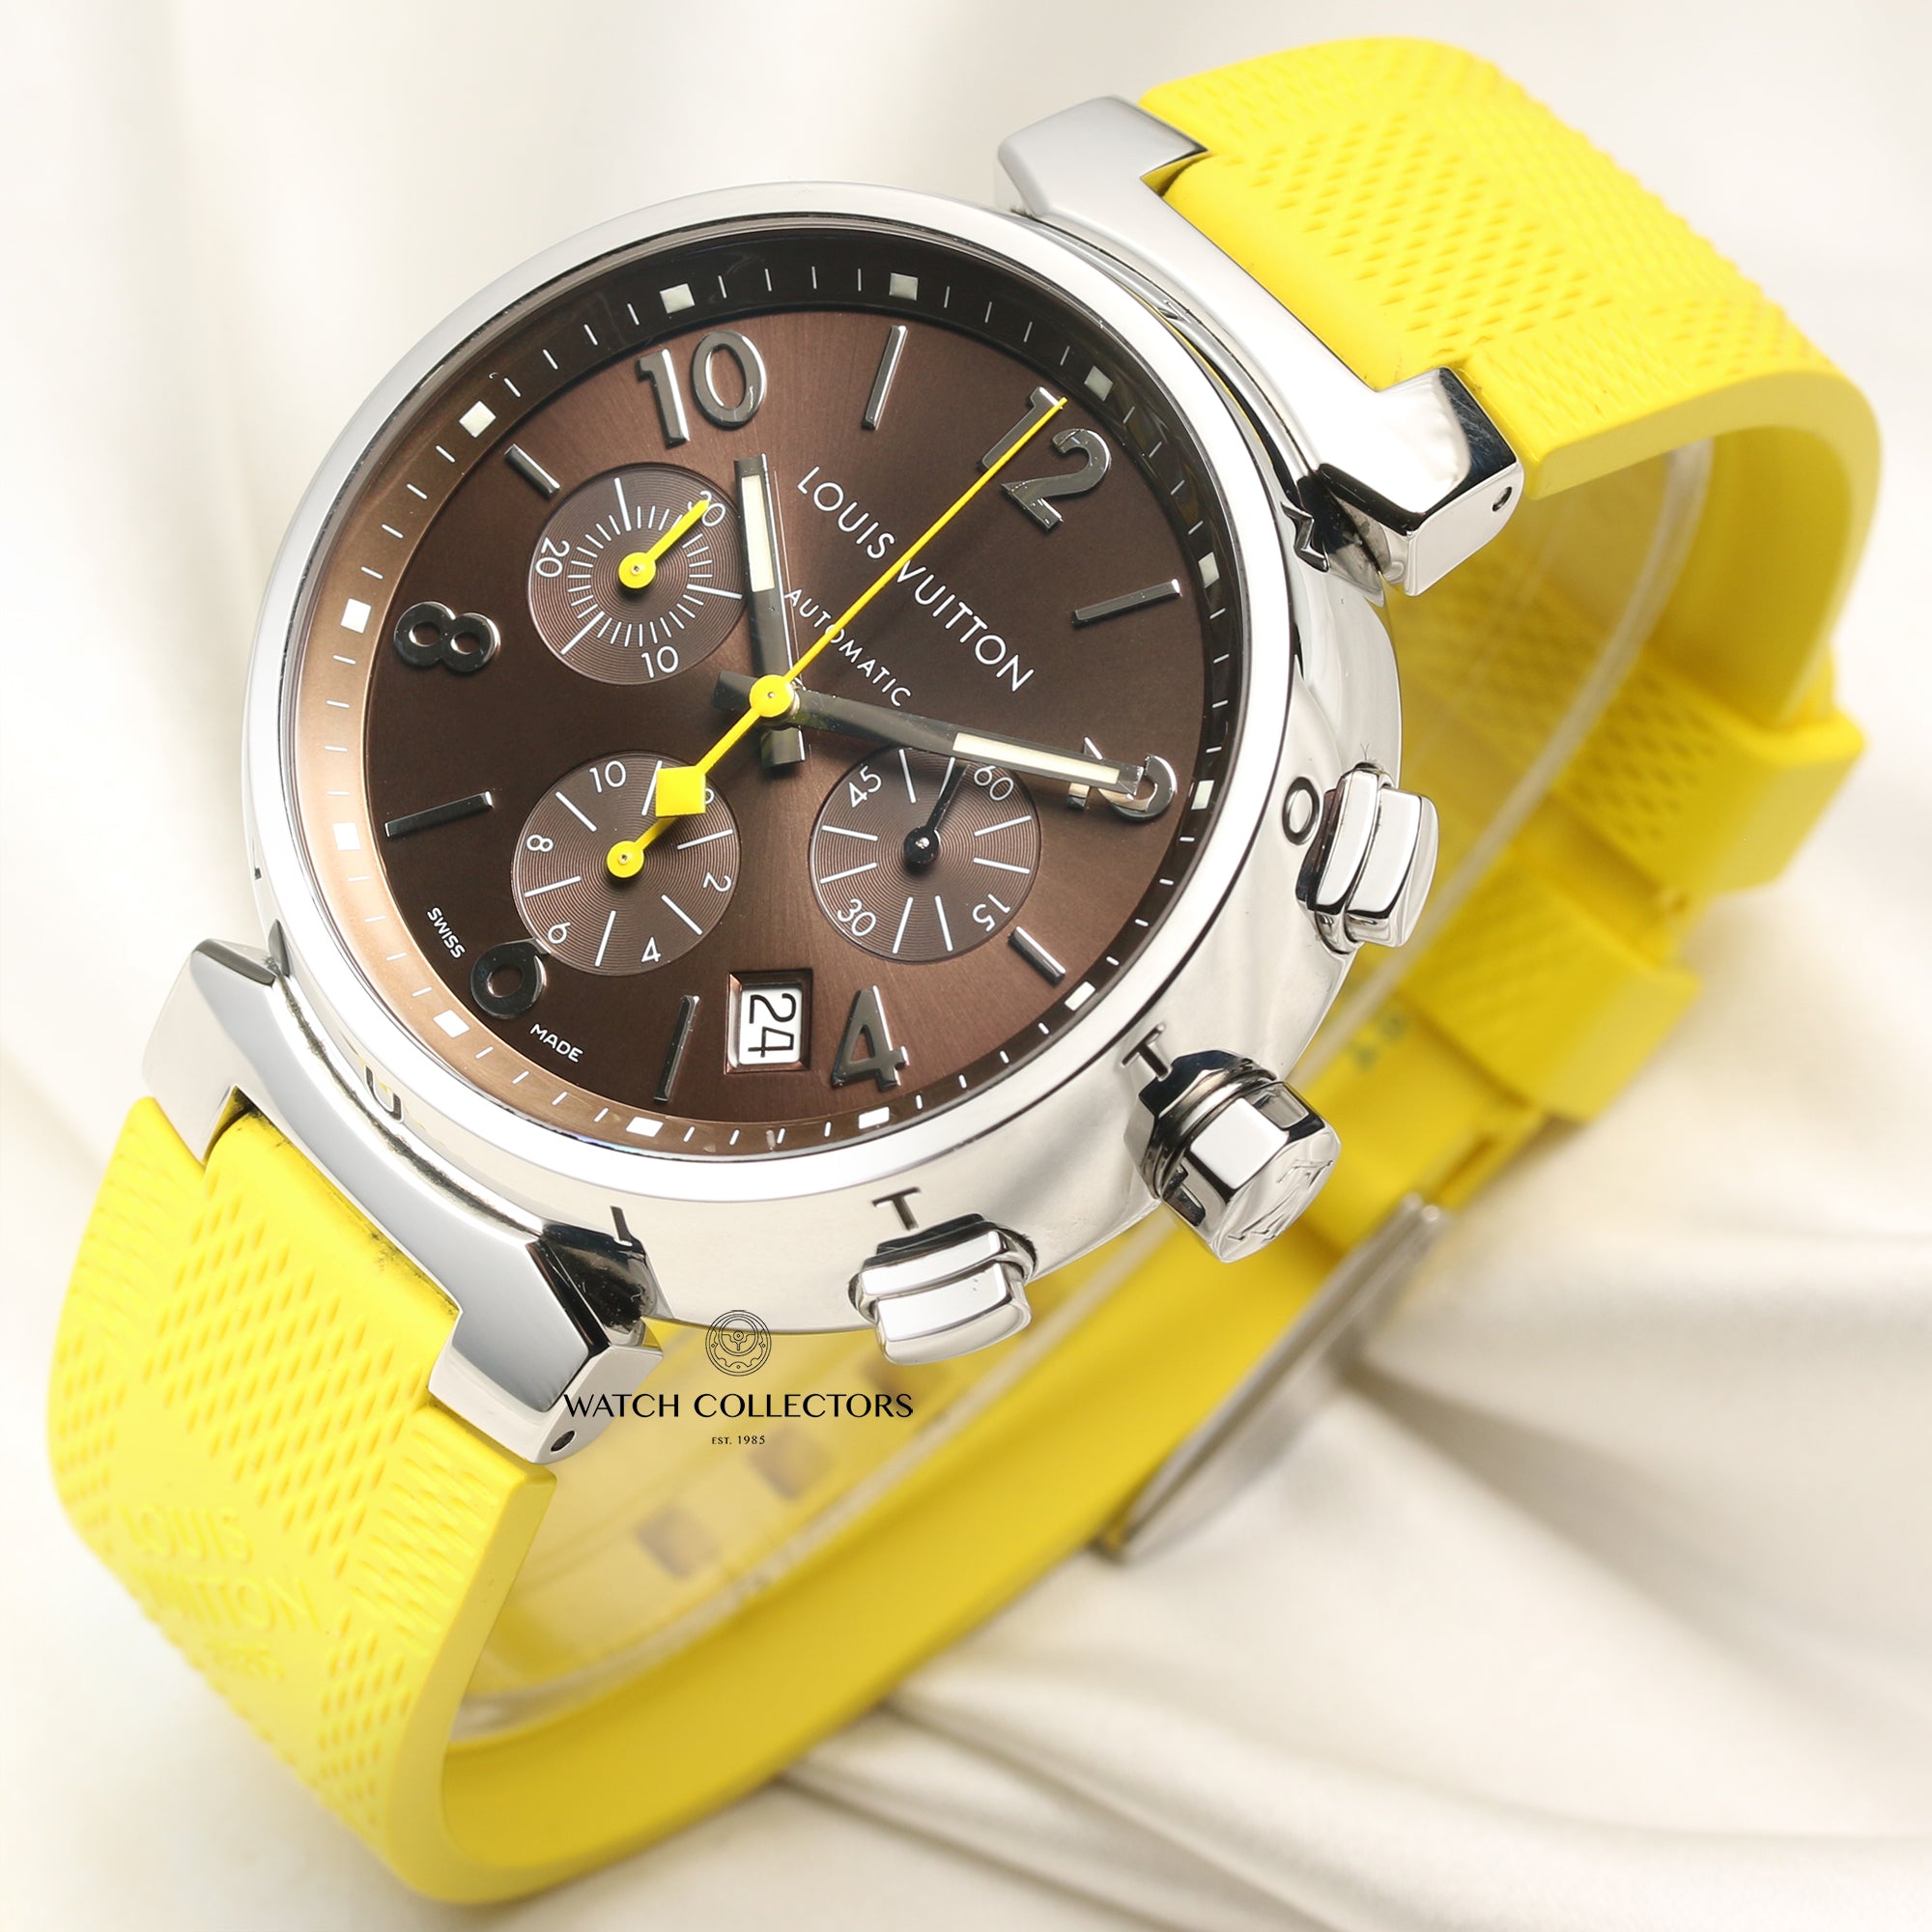 Louis Vuitton Tambour Chronograph Stainless Steel – Watch Collectors